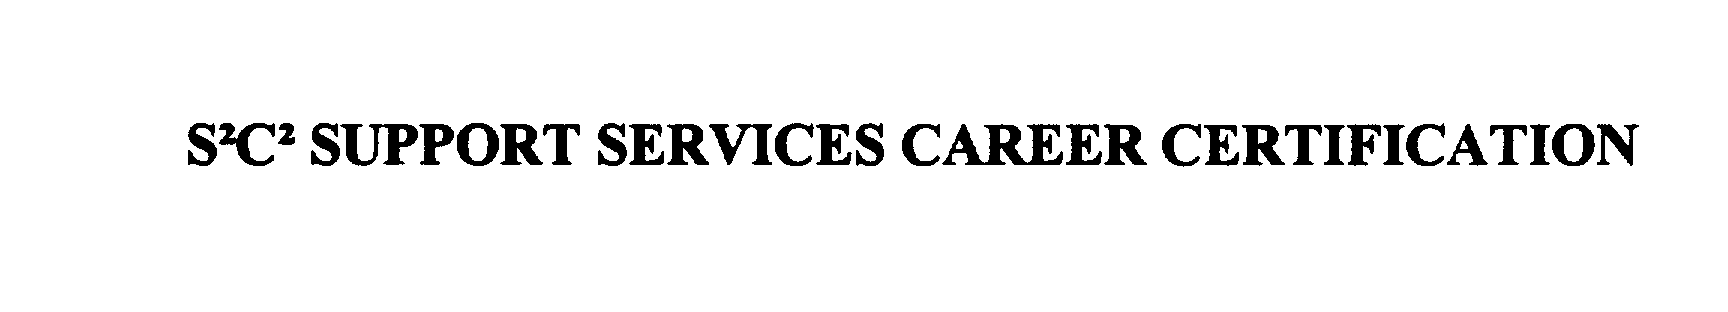  S2C2 SUPPORT SERVICES CAREER CERTIFICATION